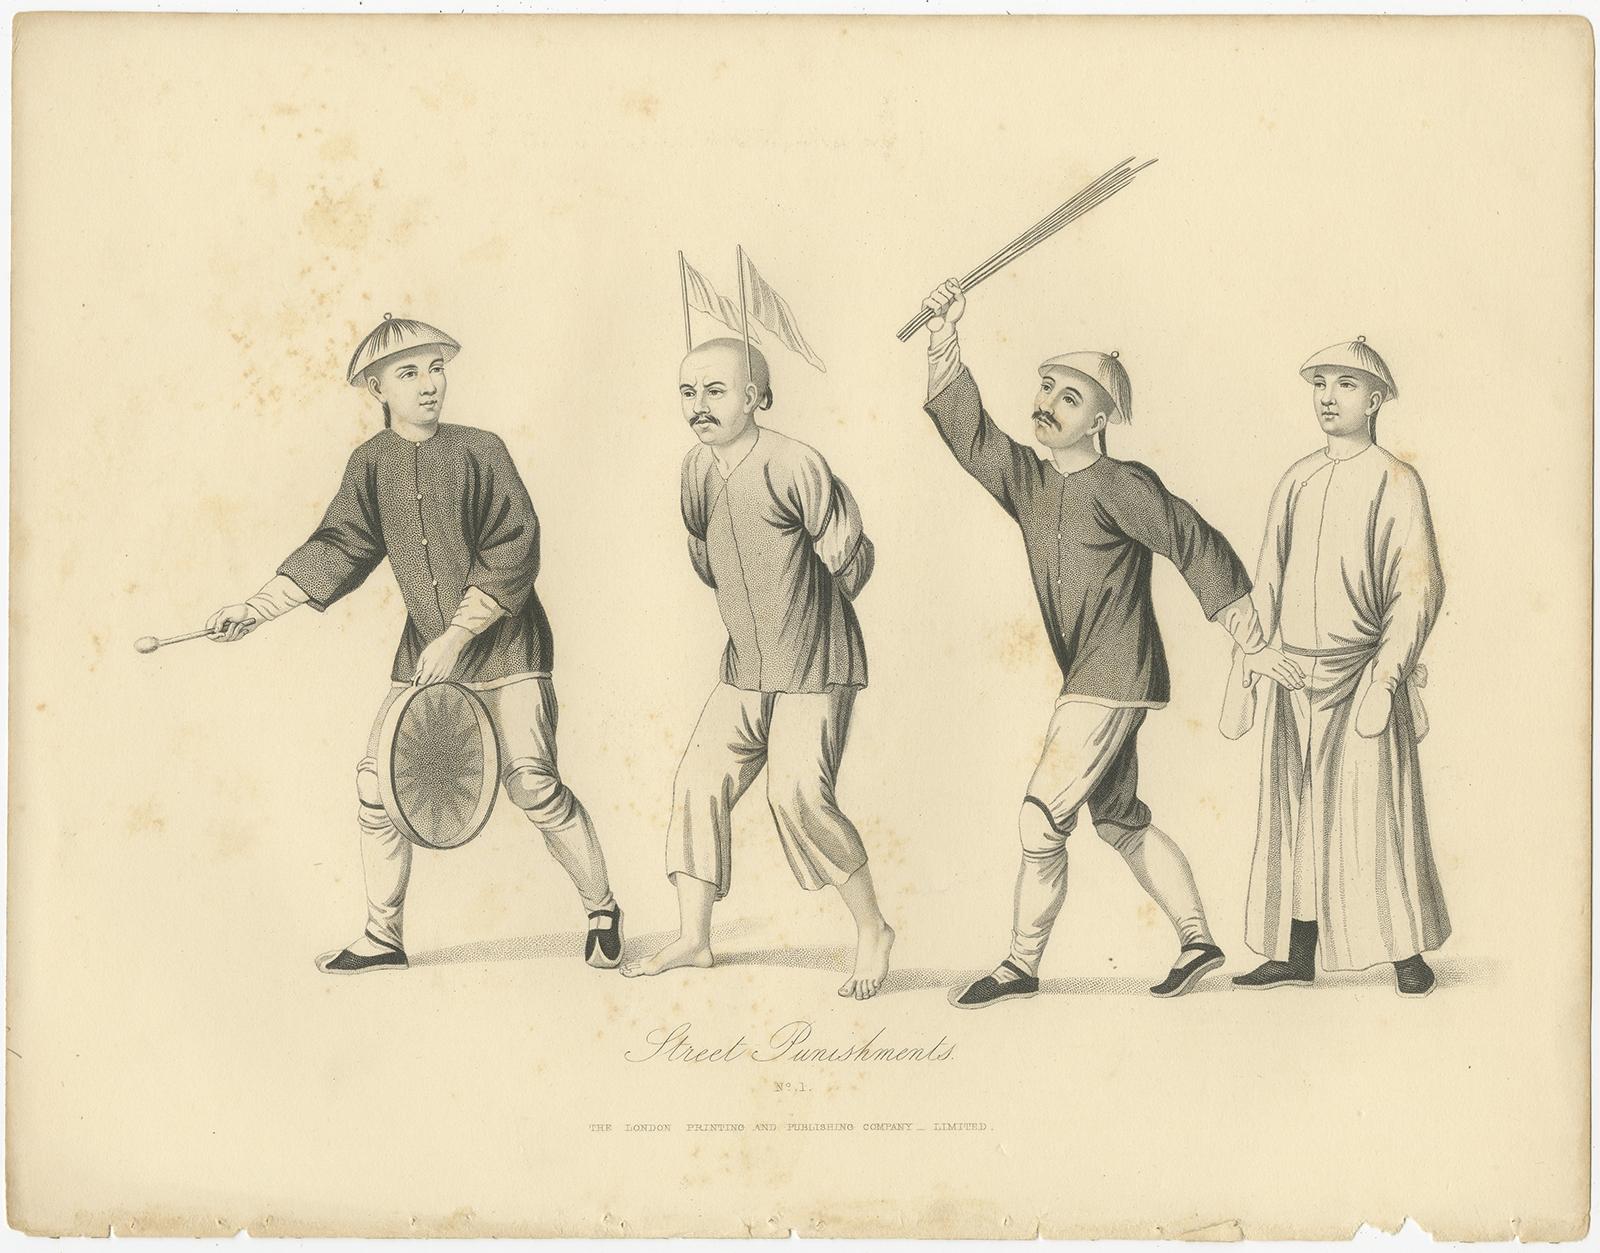 Antique print titled 'No.1 Street Punishments'. 

Print of Chinese street punishments. Shows a prisoner, his arms bound and flags attached to his ears, walking to the left down a street between a man with a drum and another man with a handful of